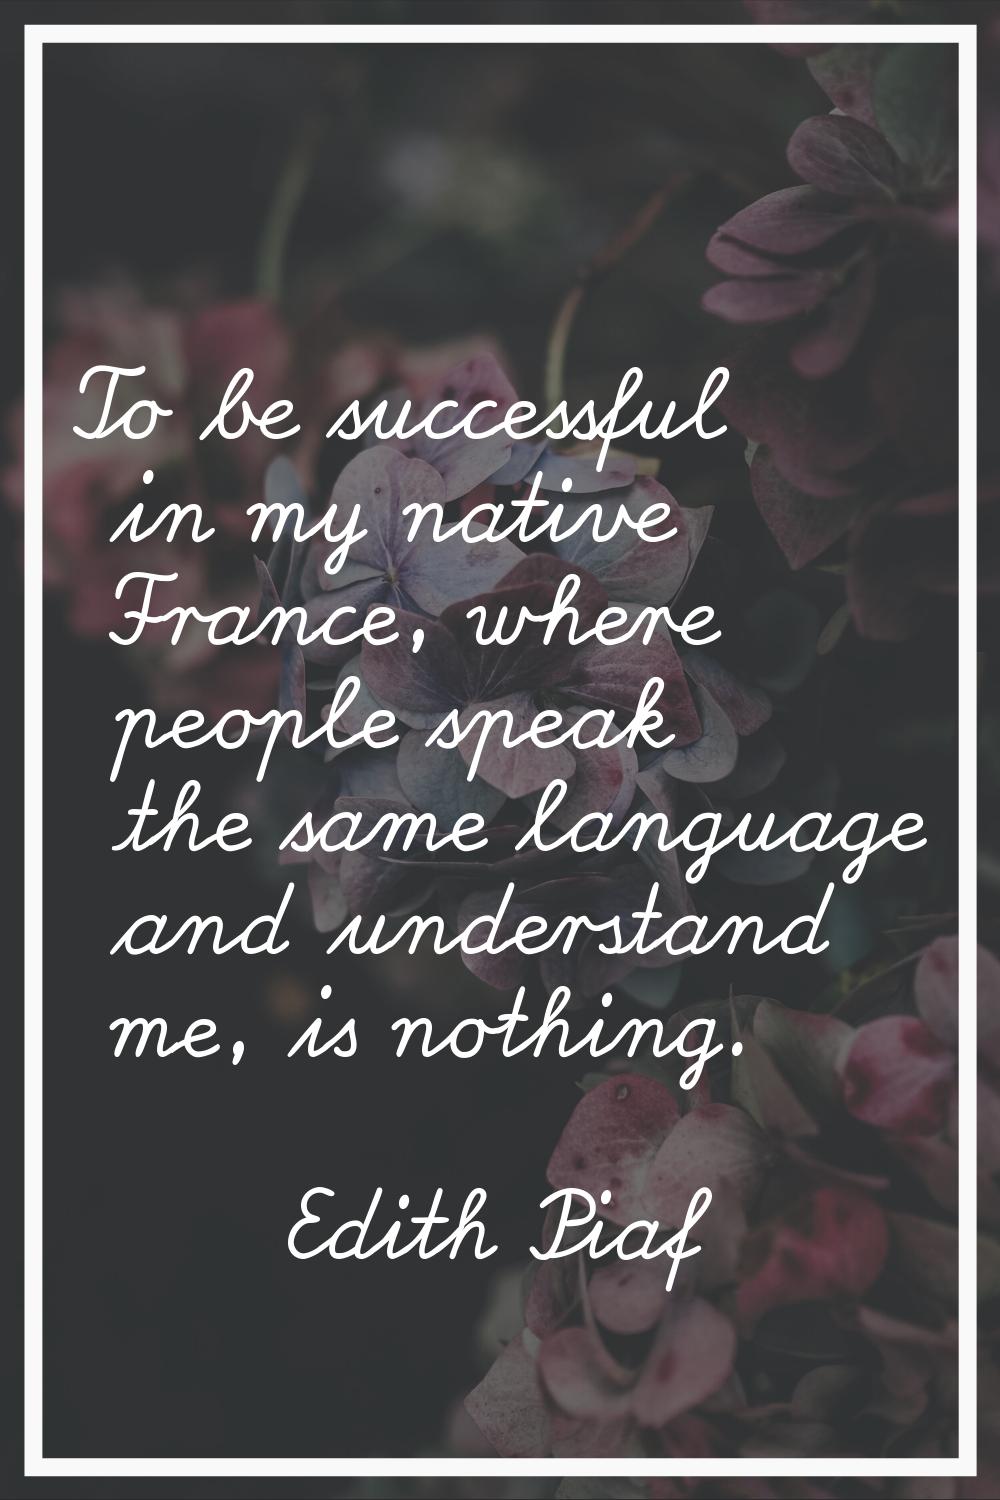 To be successful in my native France, where people speak the same language and understand me, is no